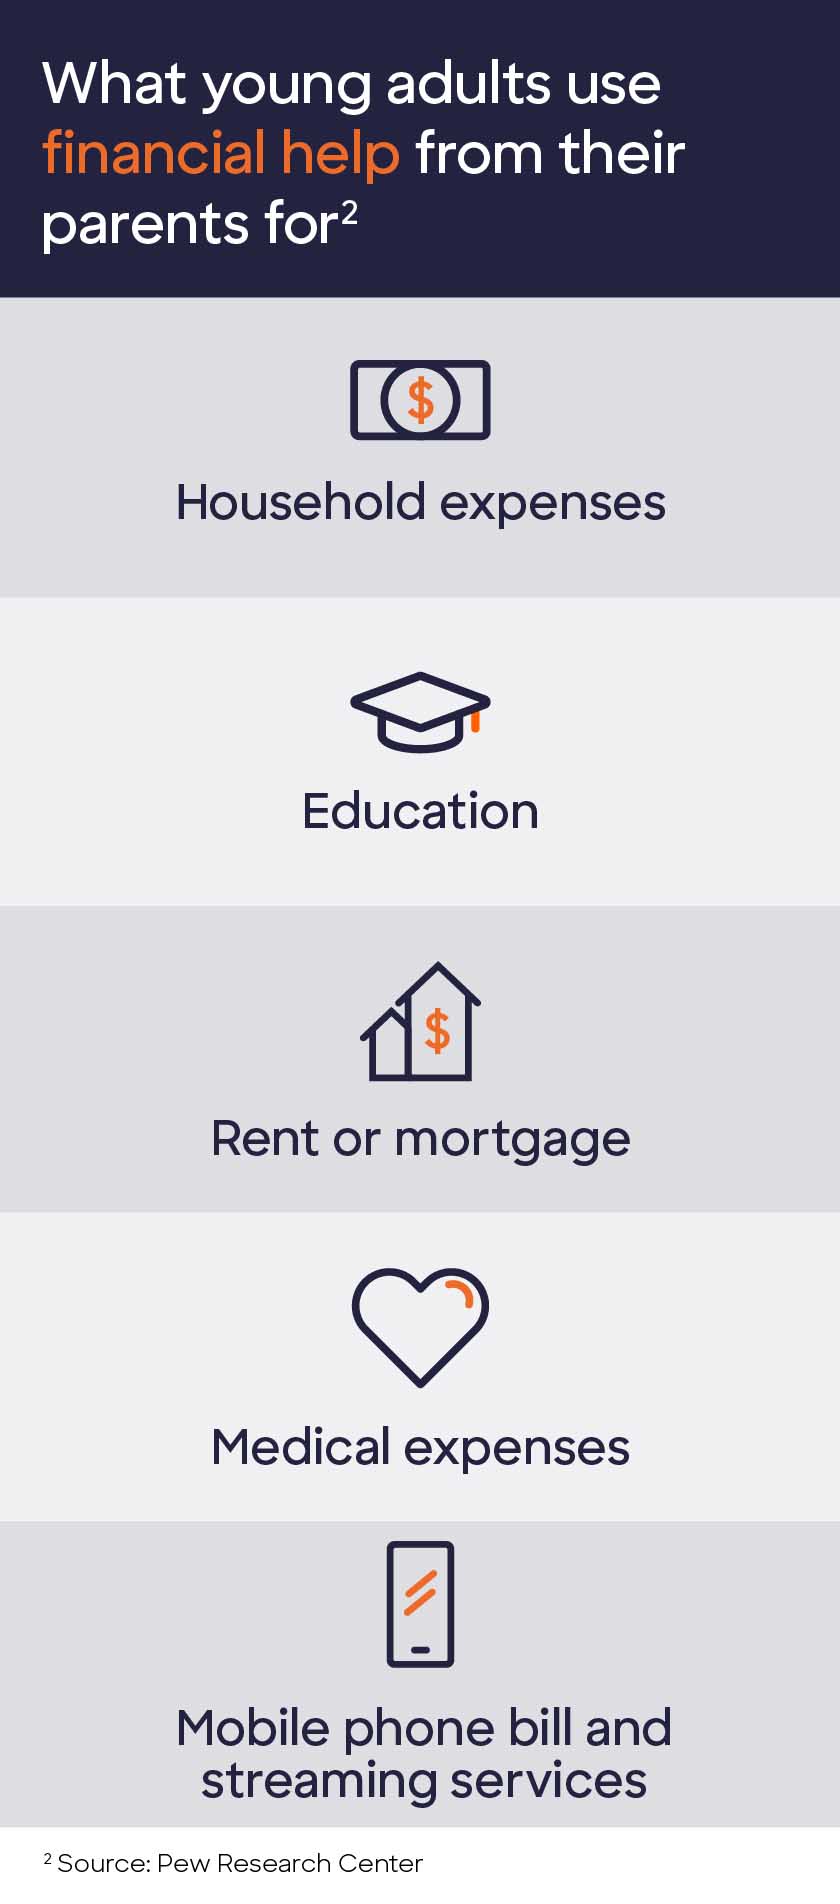 Graphic containing icons with the following text: What young adults use financial help from their parents for. Household expenses; Education; Rent or mortgage; Medical expenses; Mobile phone bill and streaming services.